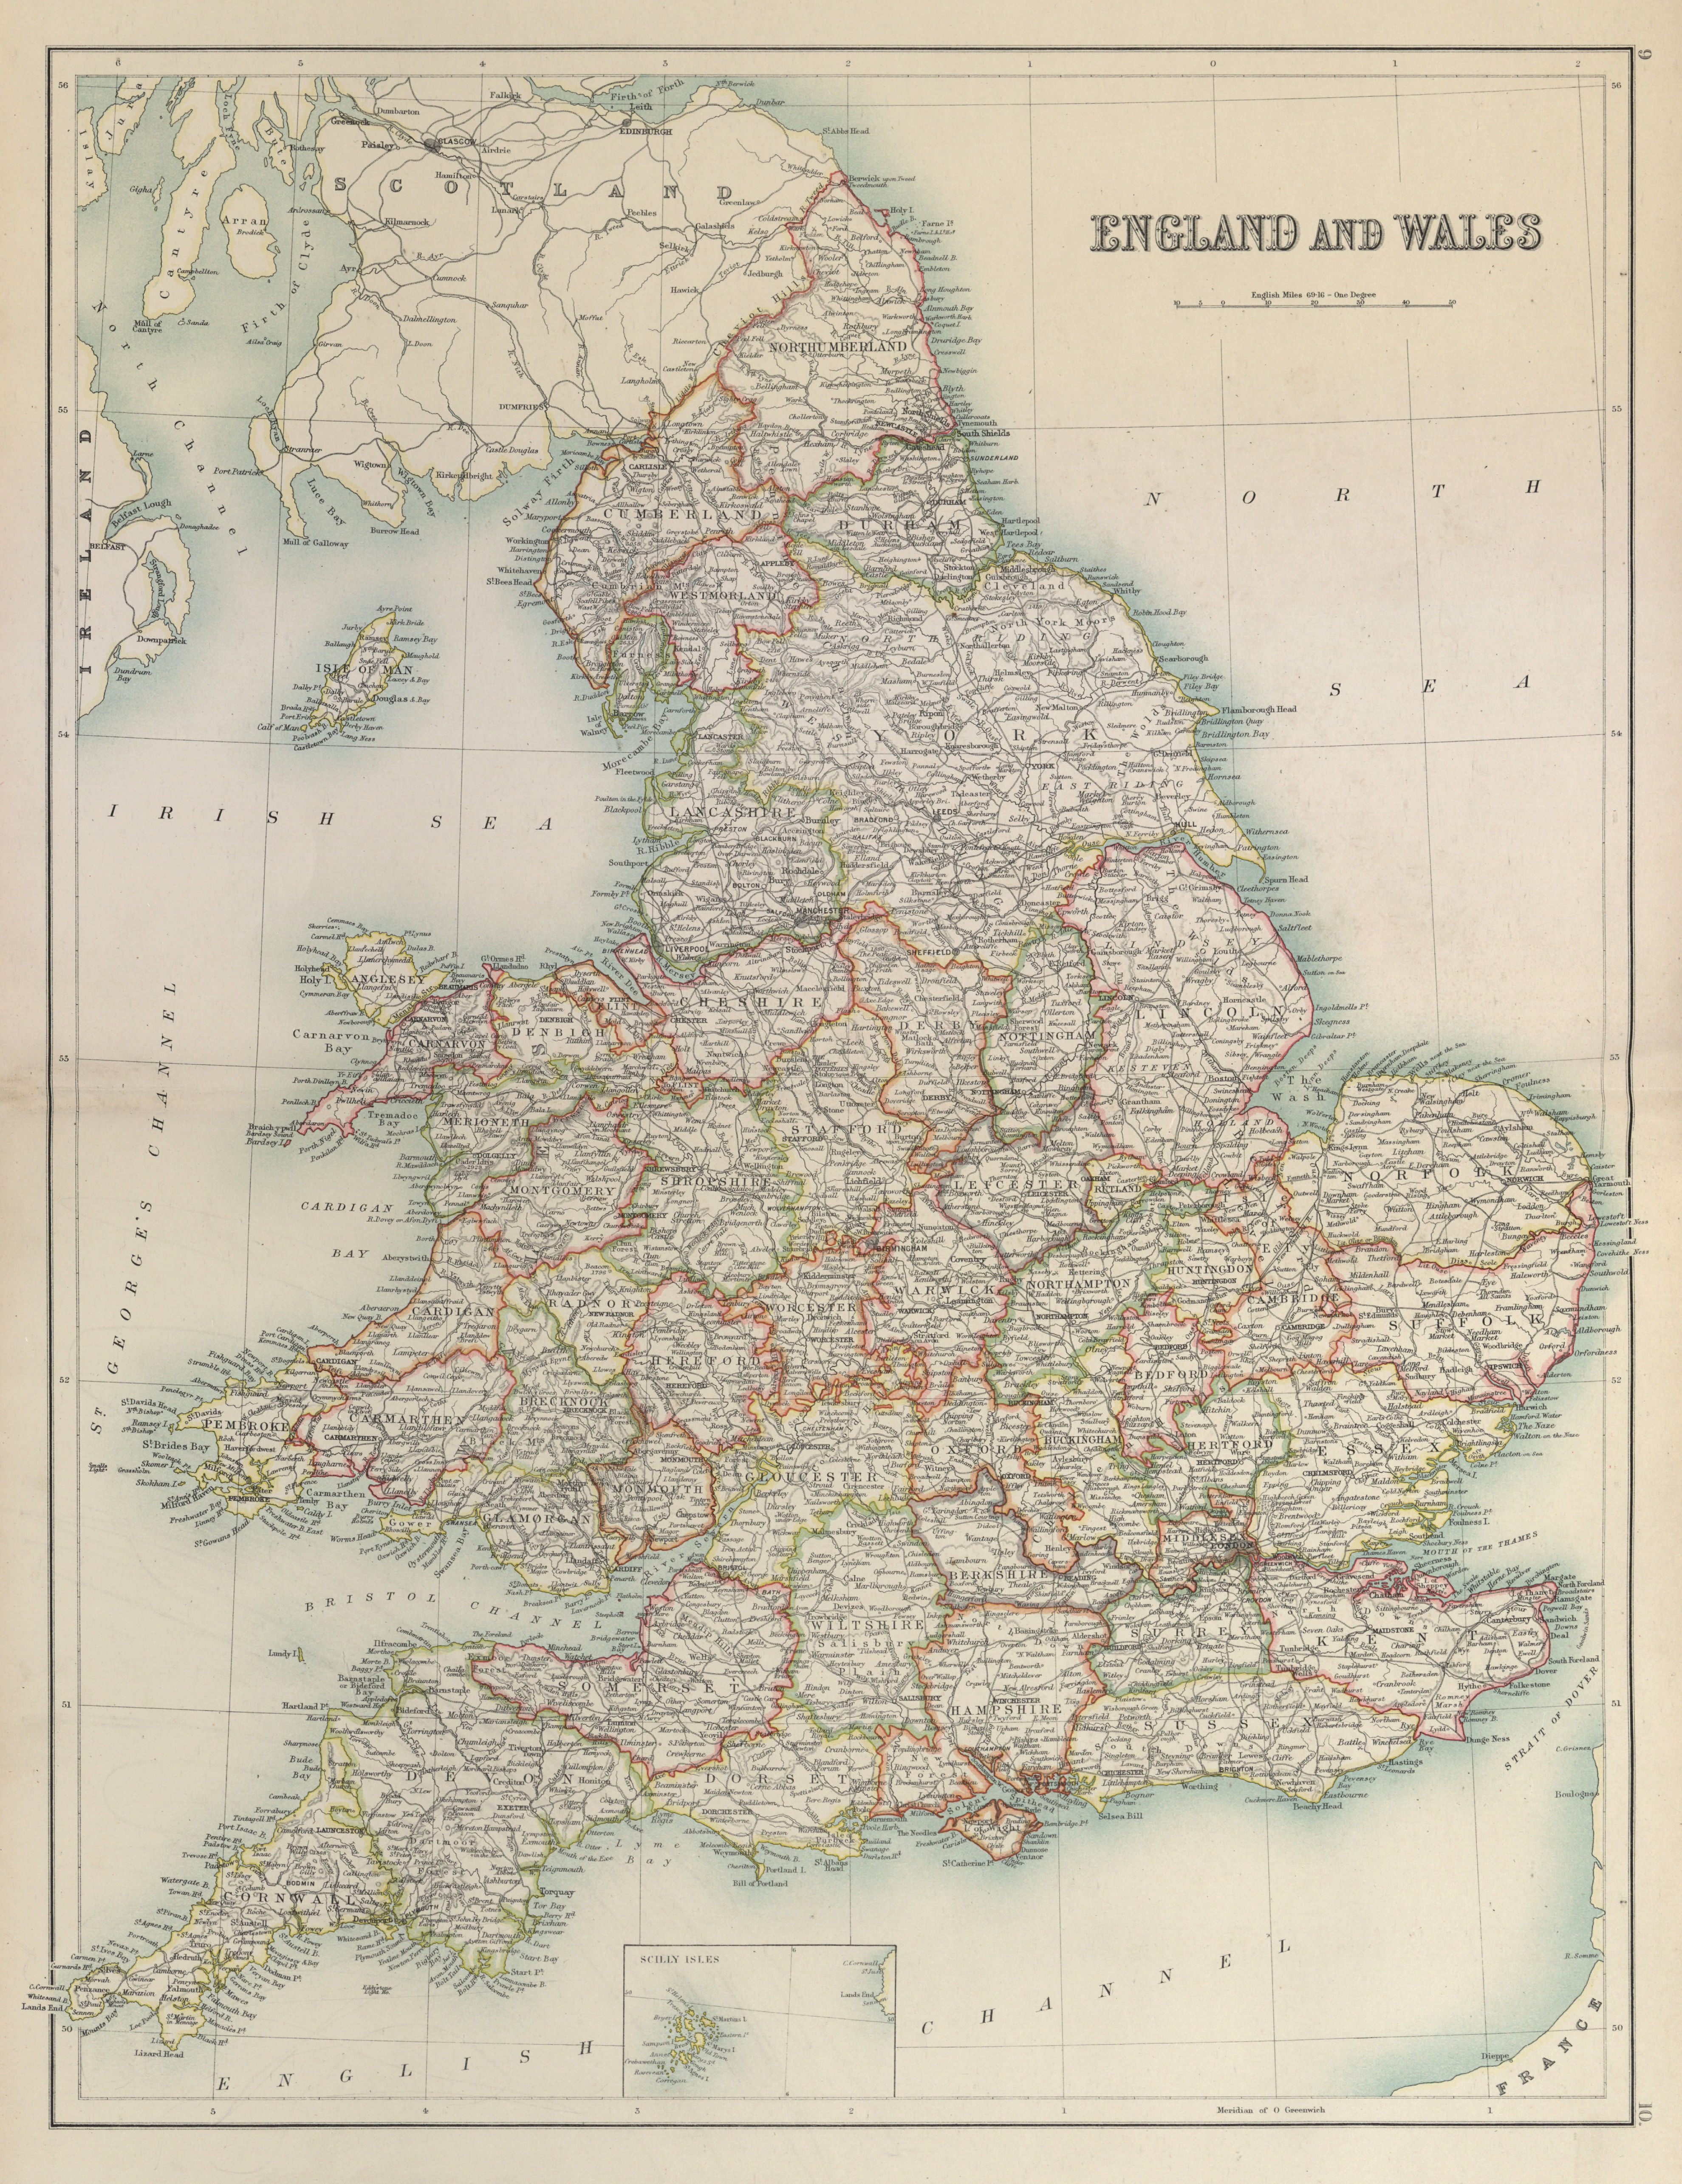 Associate Product England & Wales. Counties & railways. BARTHOLOMEW 1898 old antique map chart